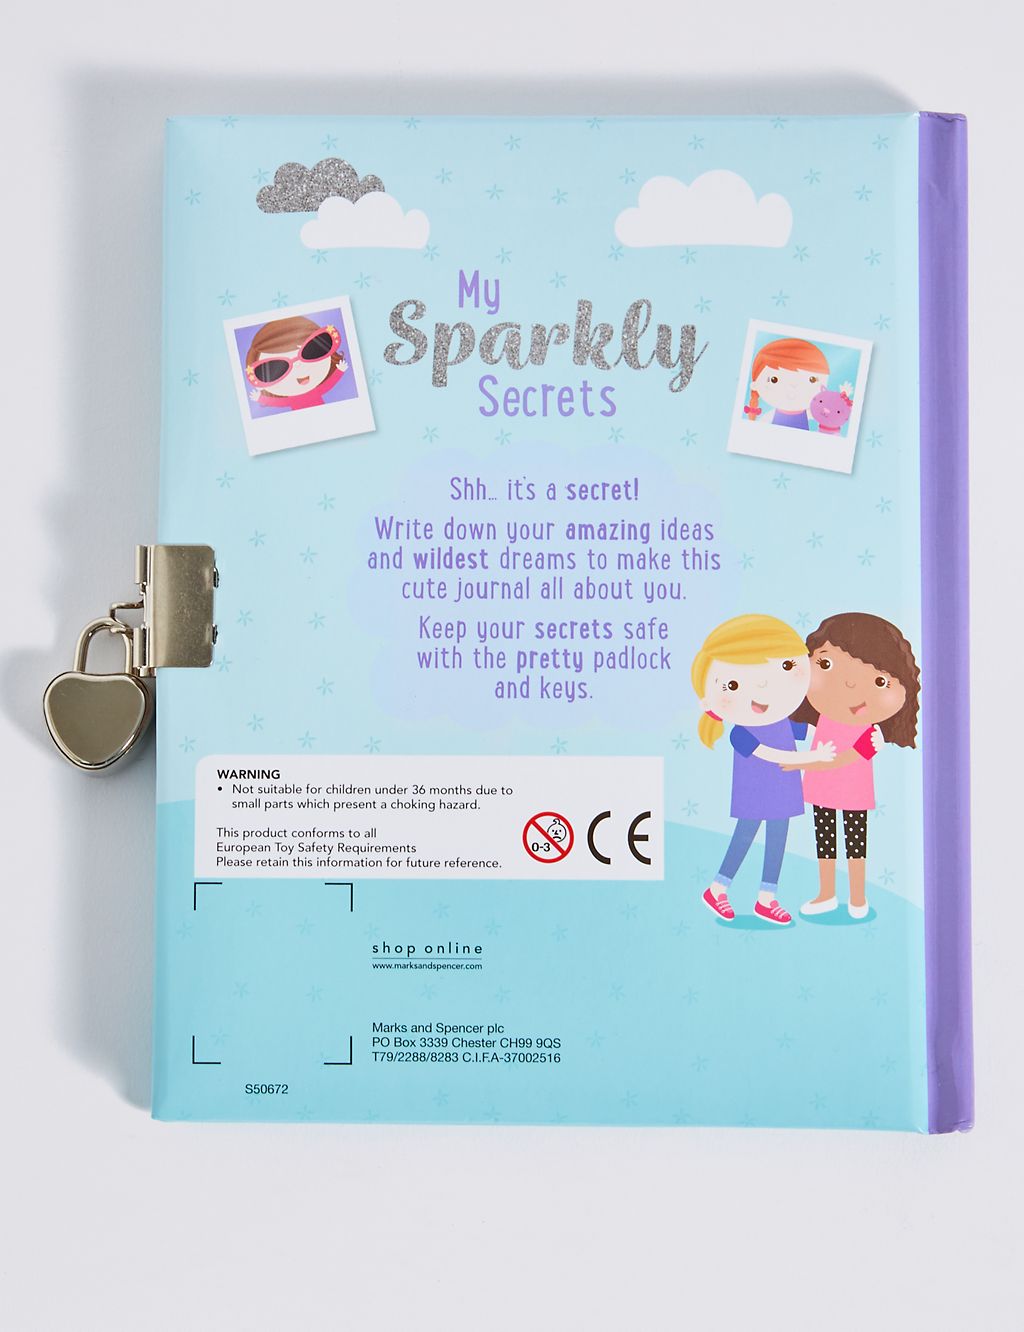 My Sparkly Secret Diary 1 of 3